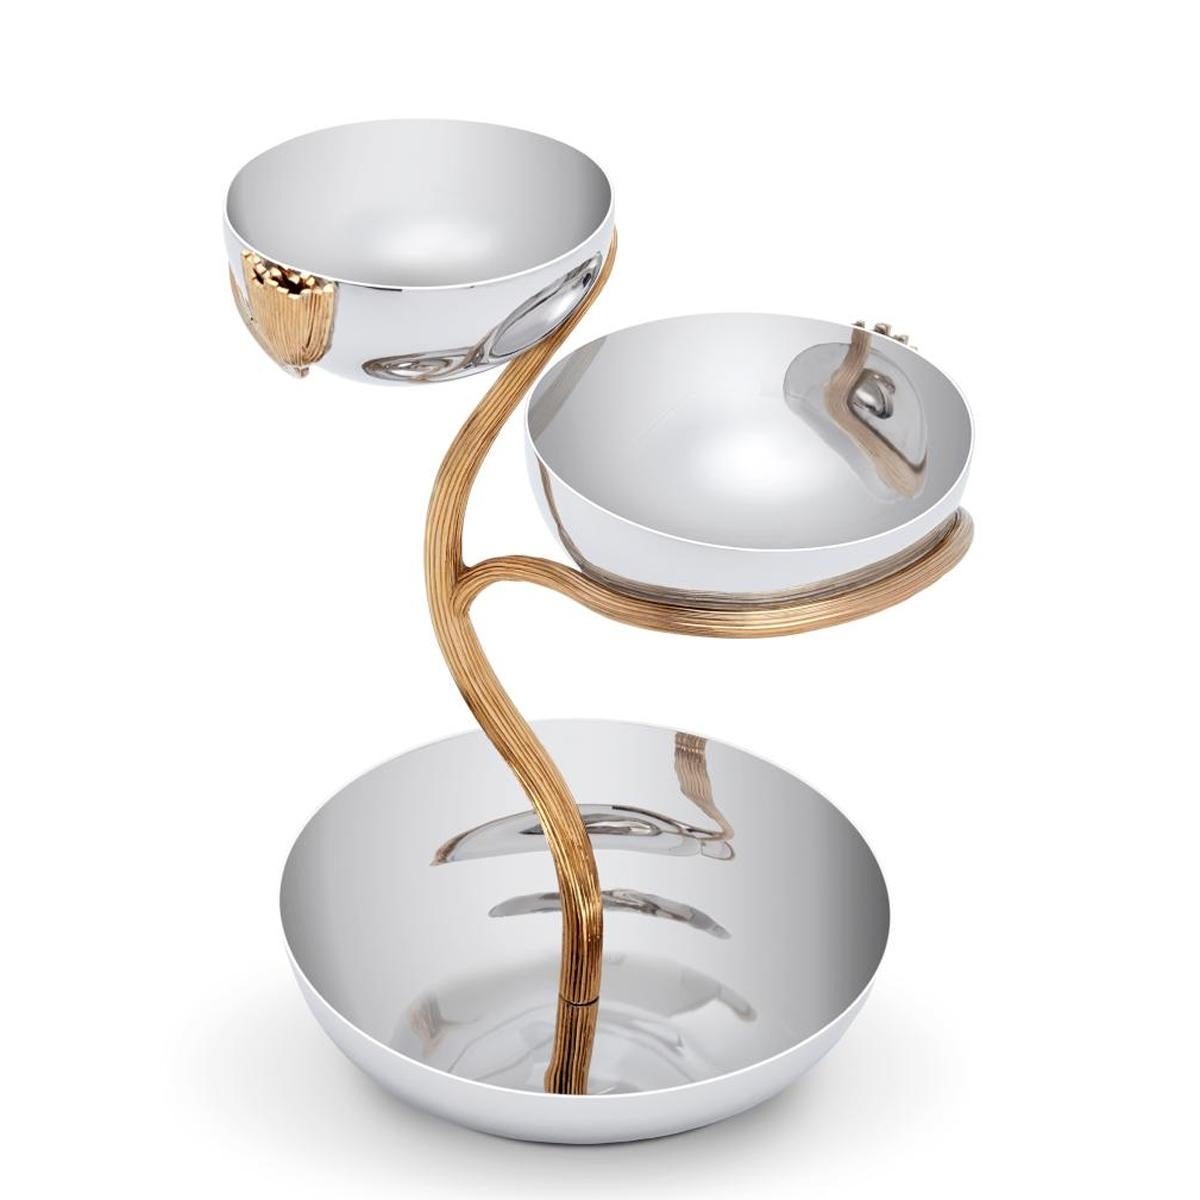 Serving bowl triple bowl with 3 bowls in
chrome polished stainless steel on a stem
in 24-karat gold-plated. With luxury gift box included.
 